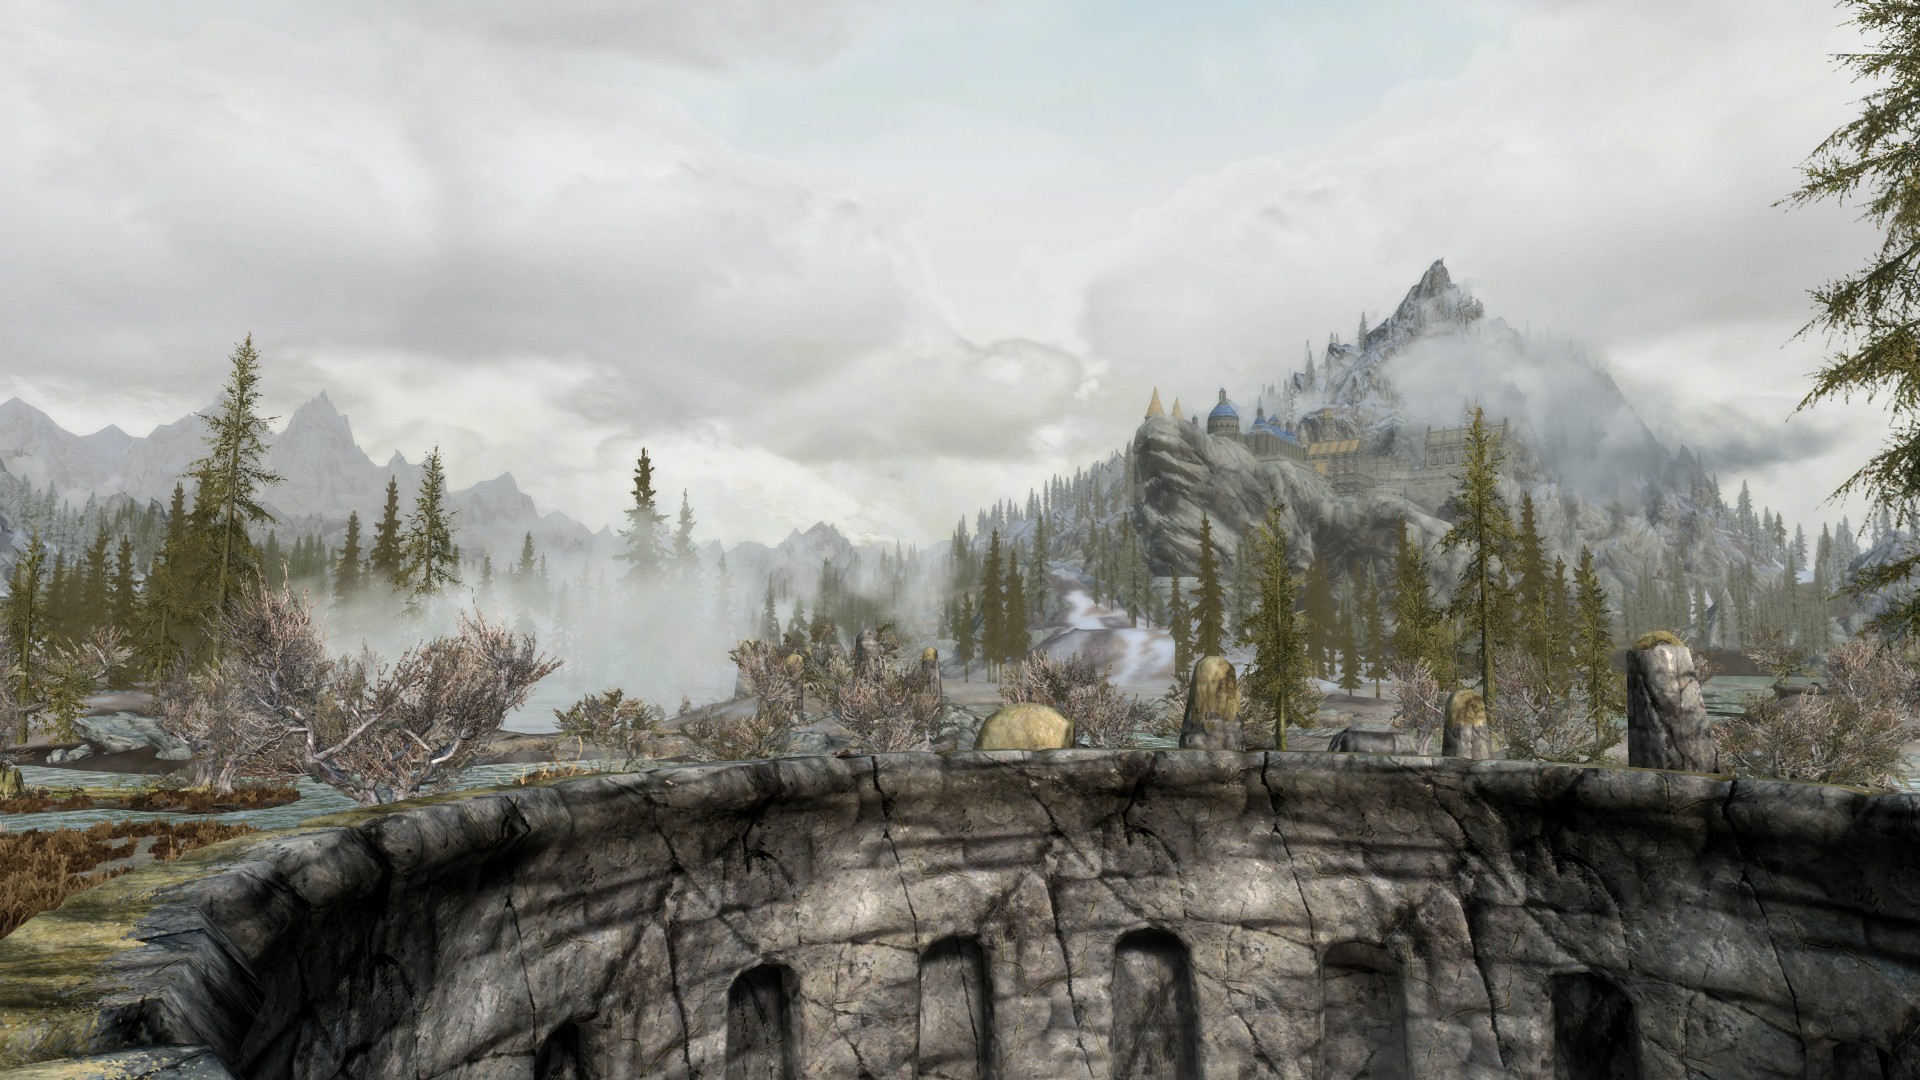 Skyrim - Solitude From A Distance Skyrim , HD Wallpaper & Backgrounds